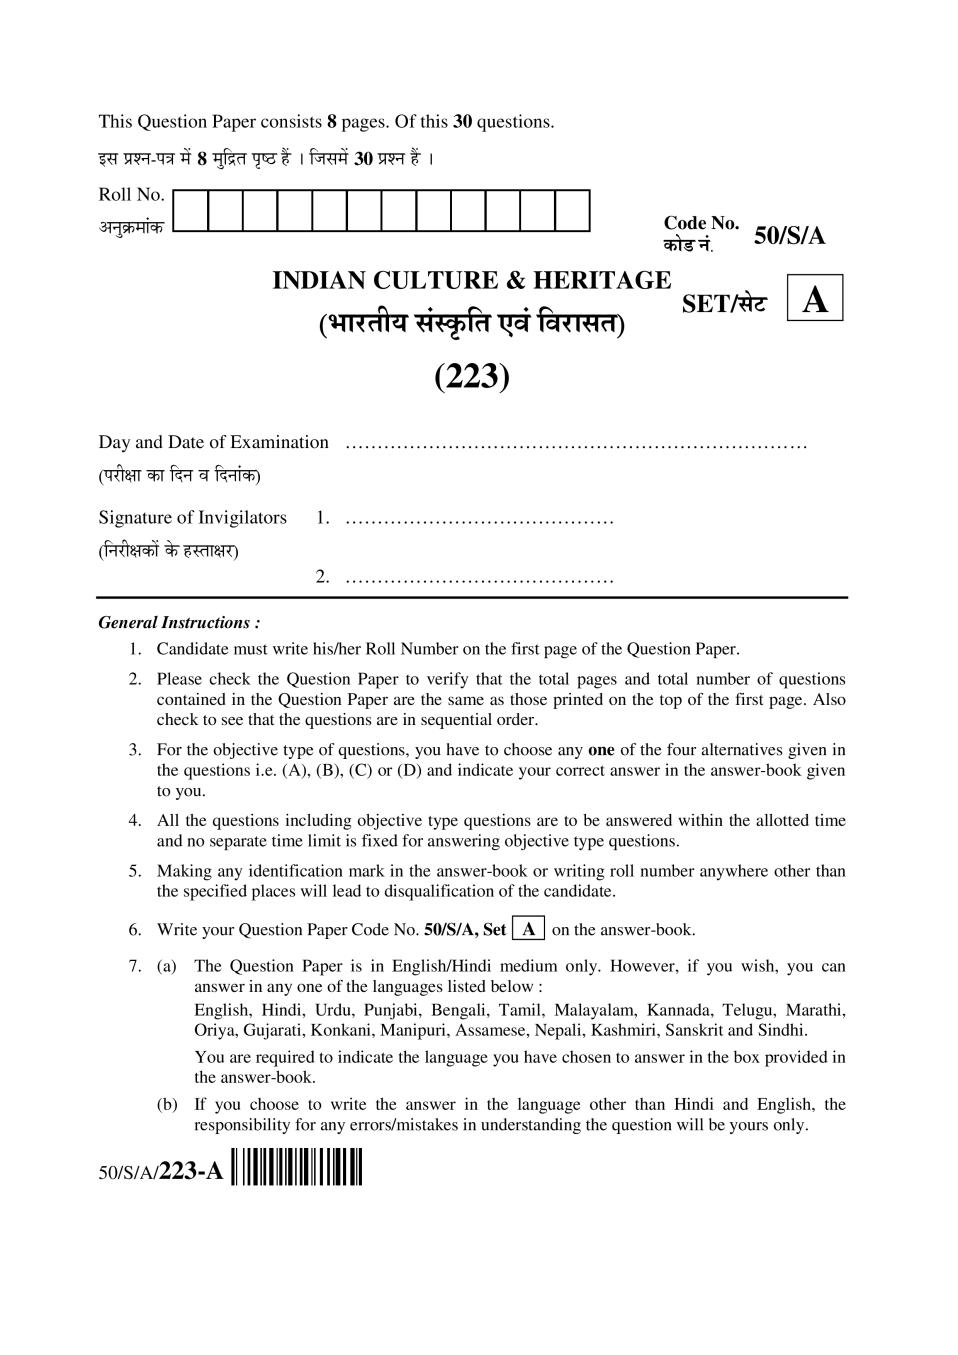 NIOS Class 10 Question Paper Apr 2015 - Indian Culture And Heritage - Page 1